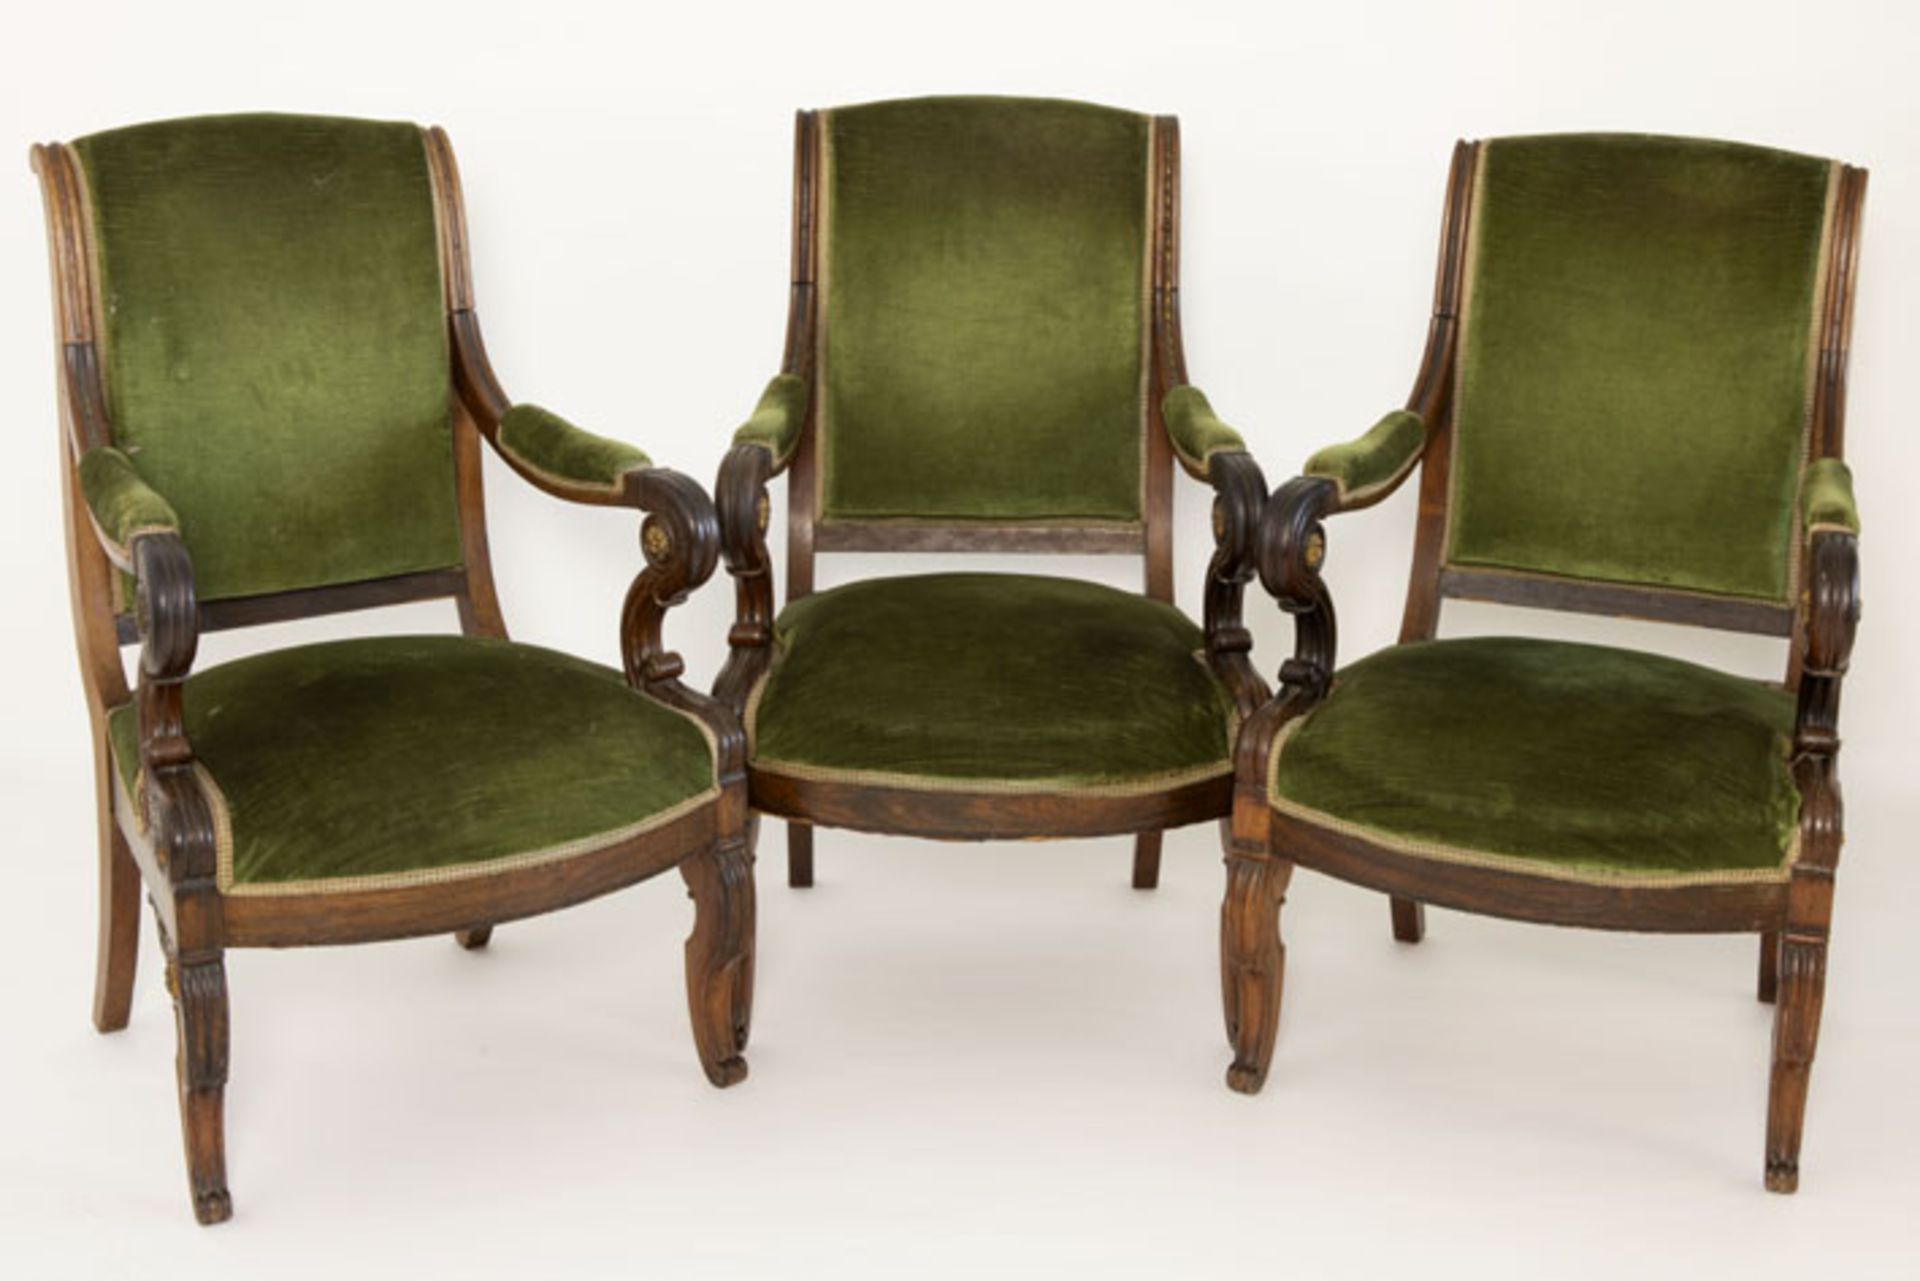 set of three 19th Cent. Empire style armchairs in mahogany - - Set van drie [...]